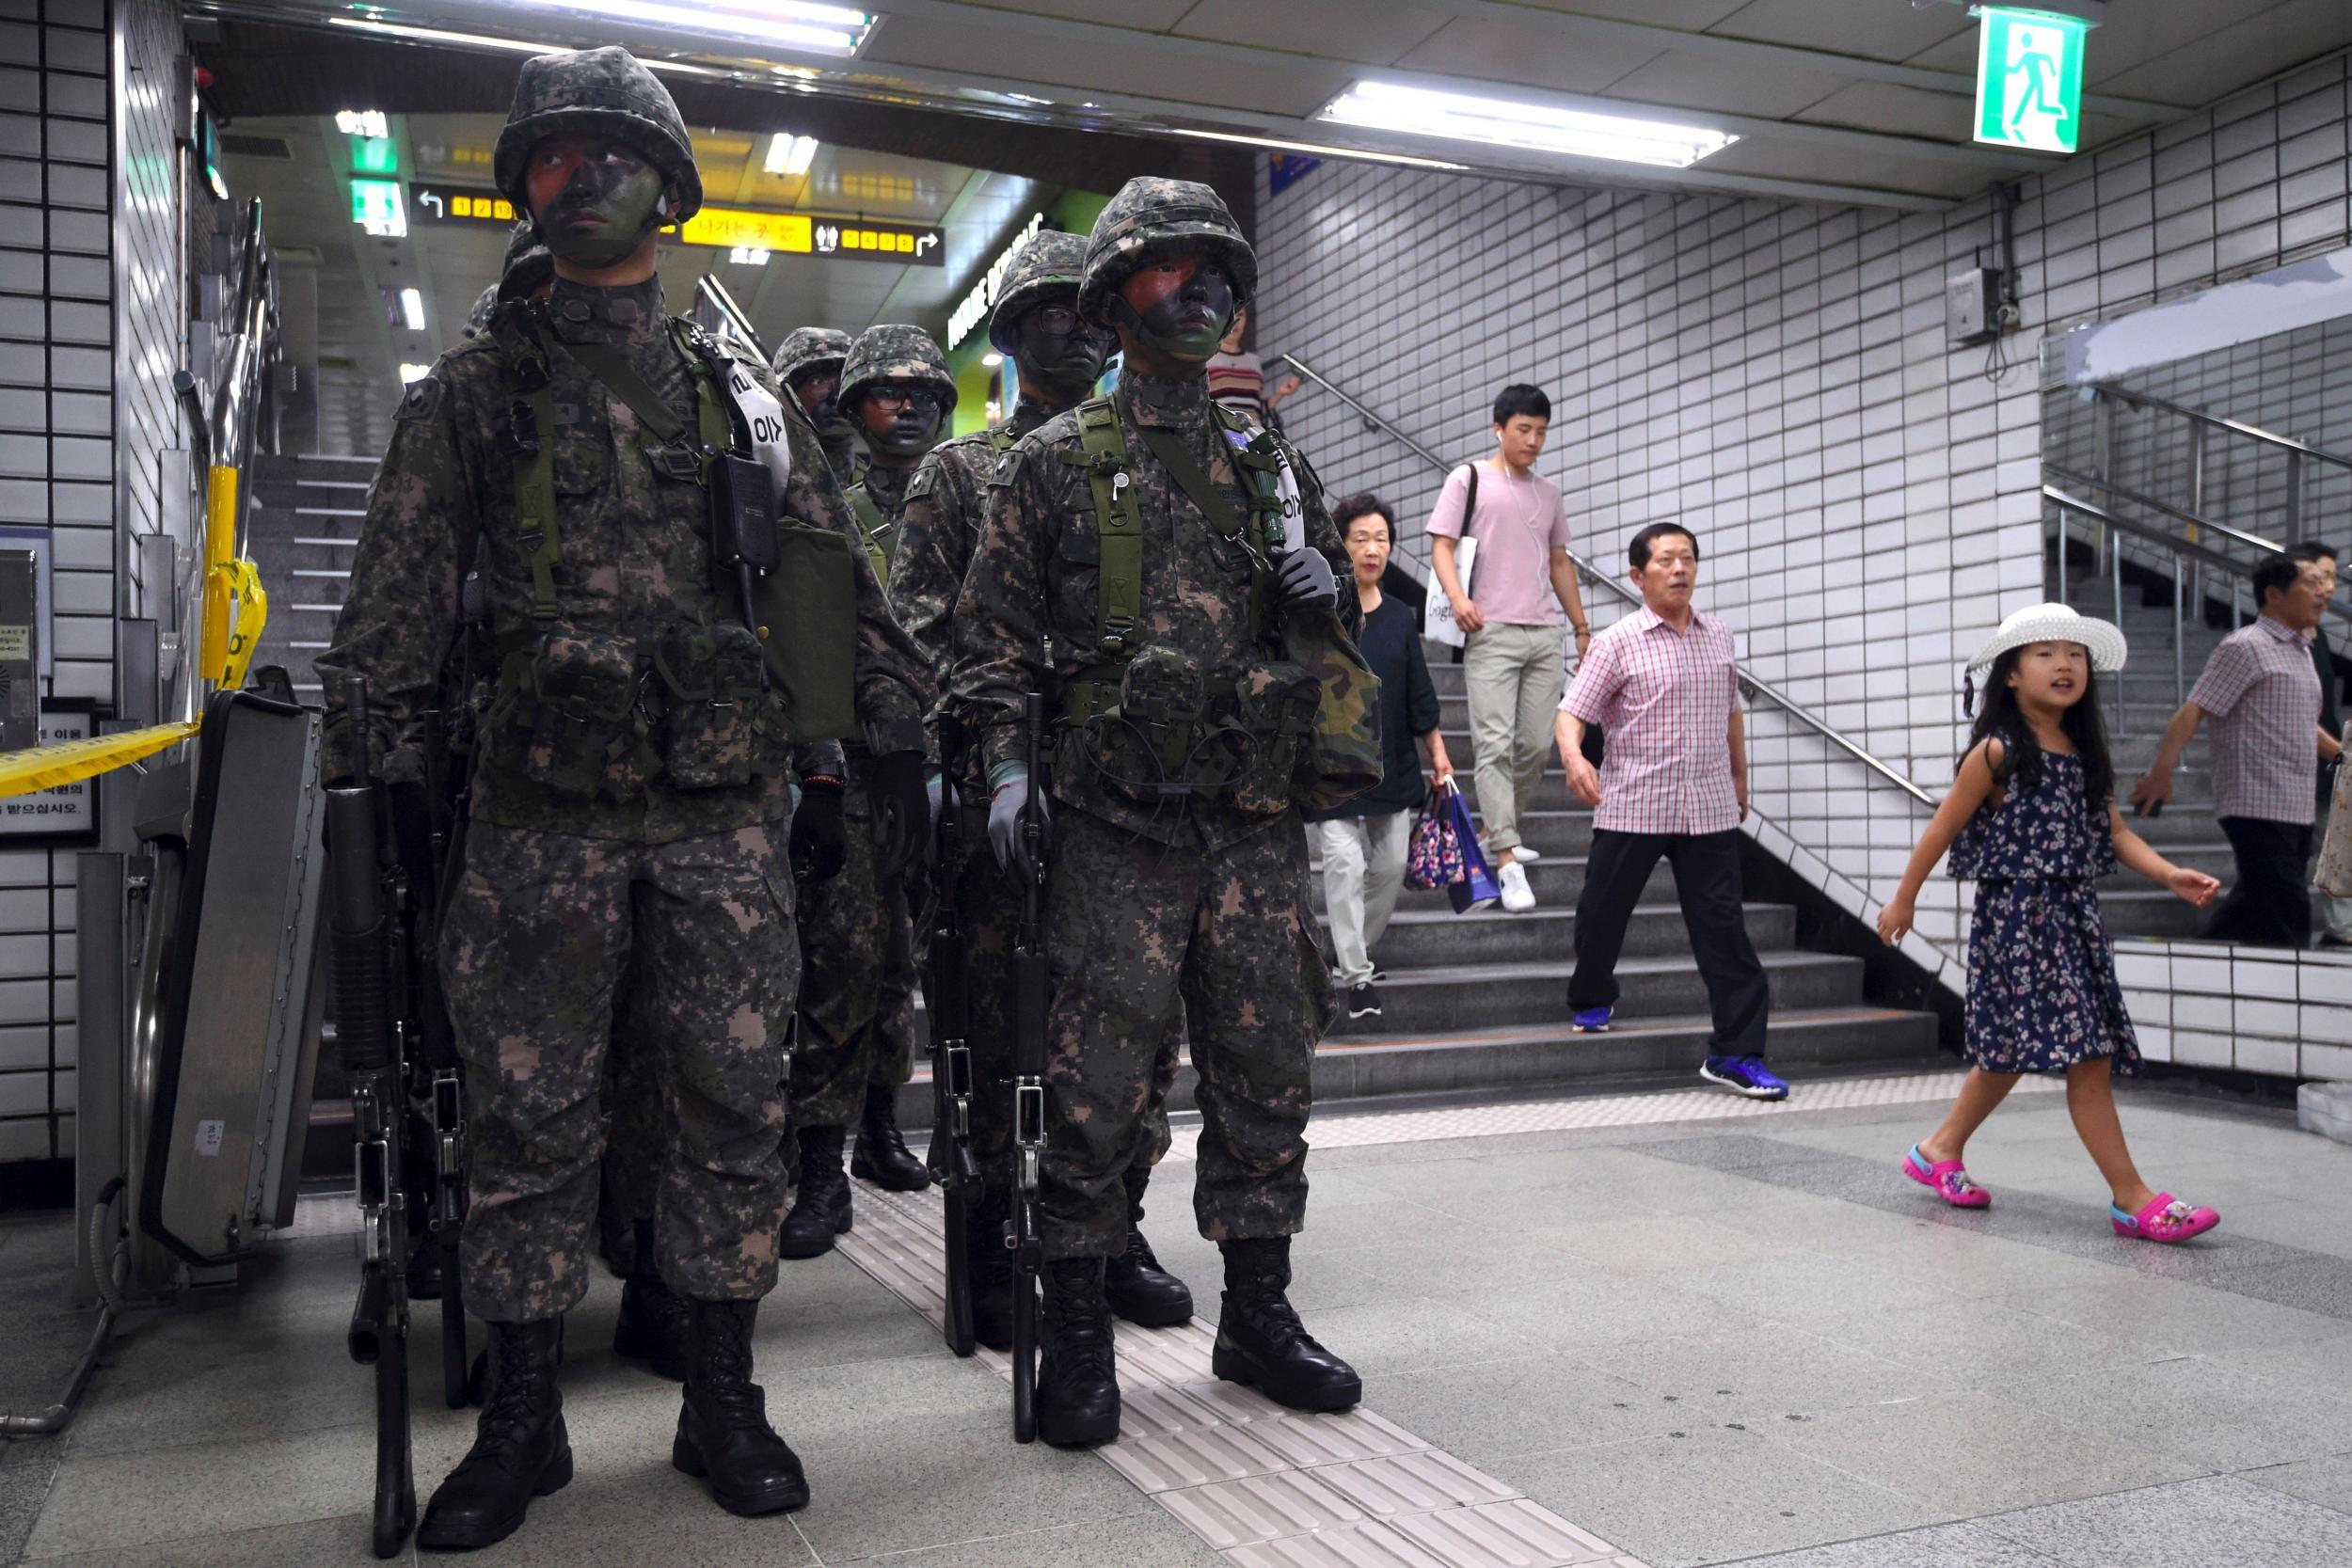 South Korean soldiers take part in an anti-terror drill at a subway station on the sidelines of a South Korea-US joint military exercise